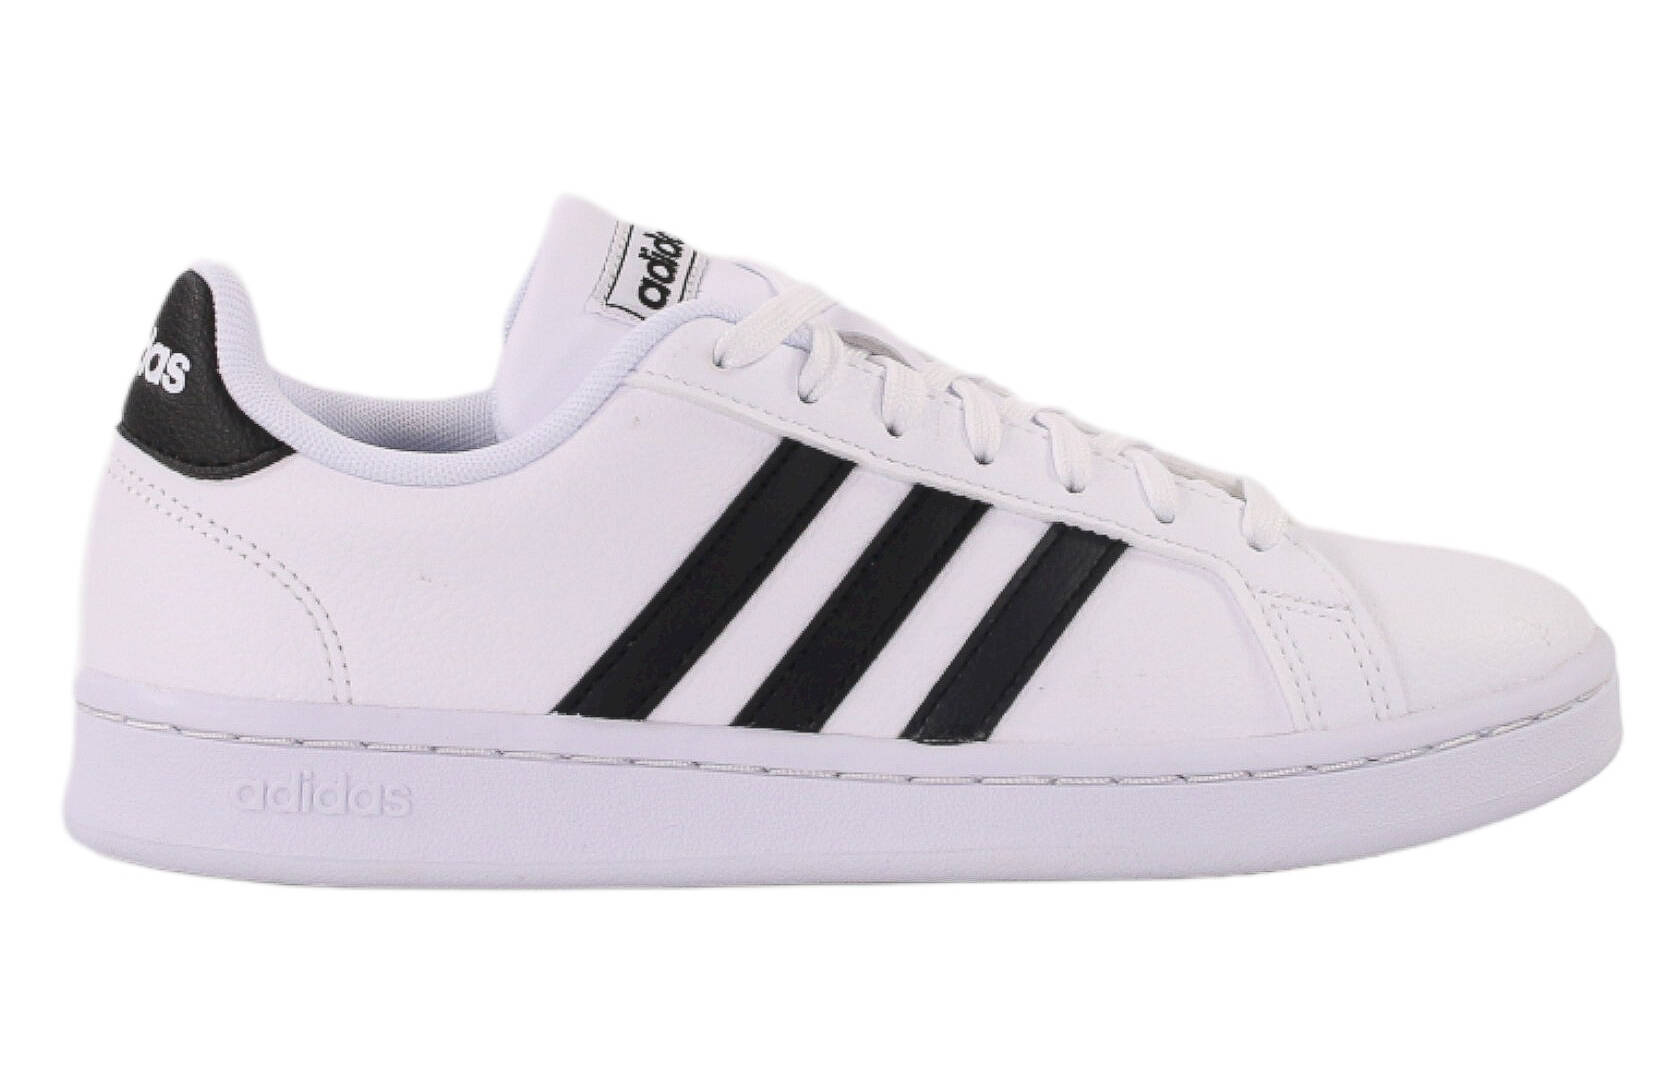 Adidas GRAND COURT F36483 women's shoes